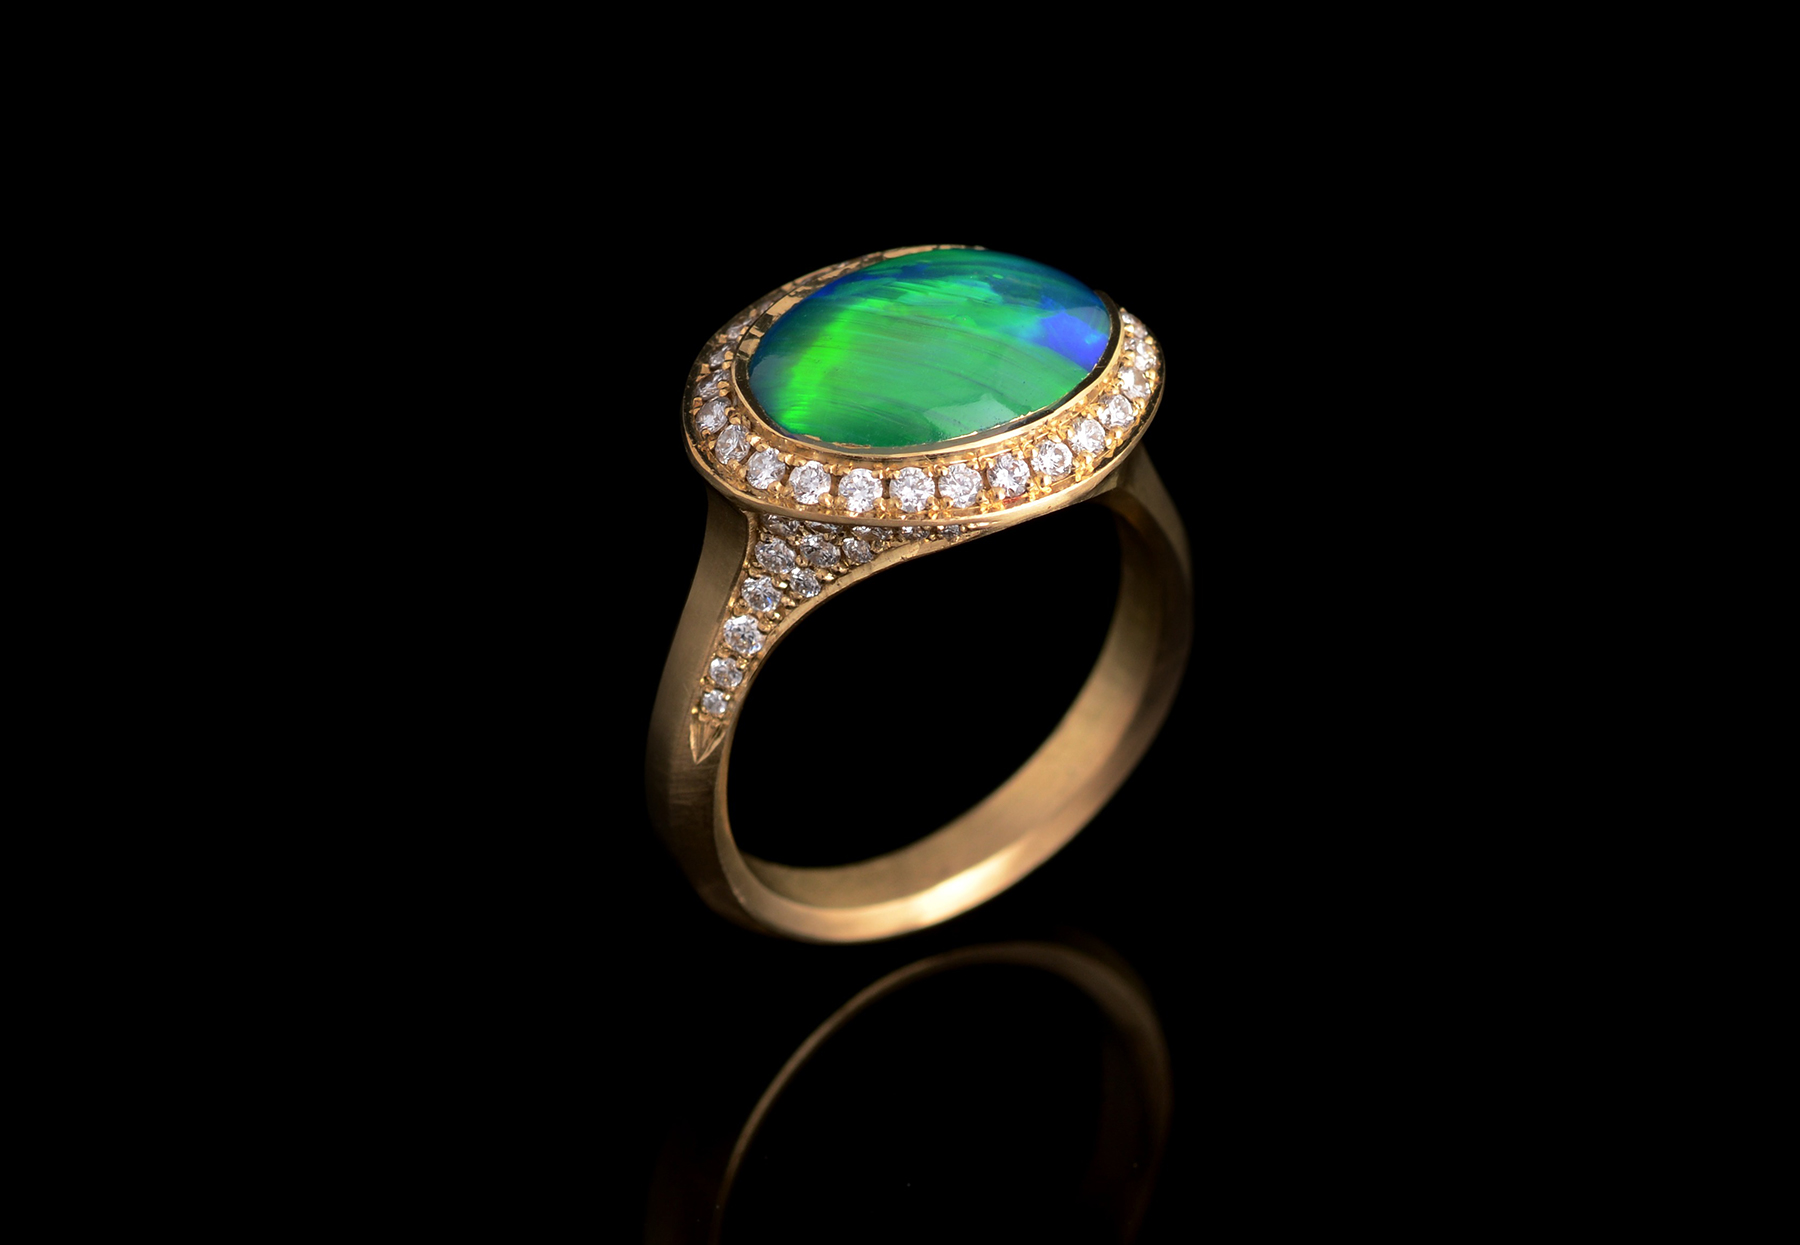 Bespoke yellow gold and opal ring with white diamond halo